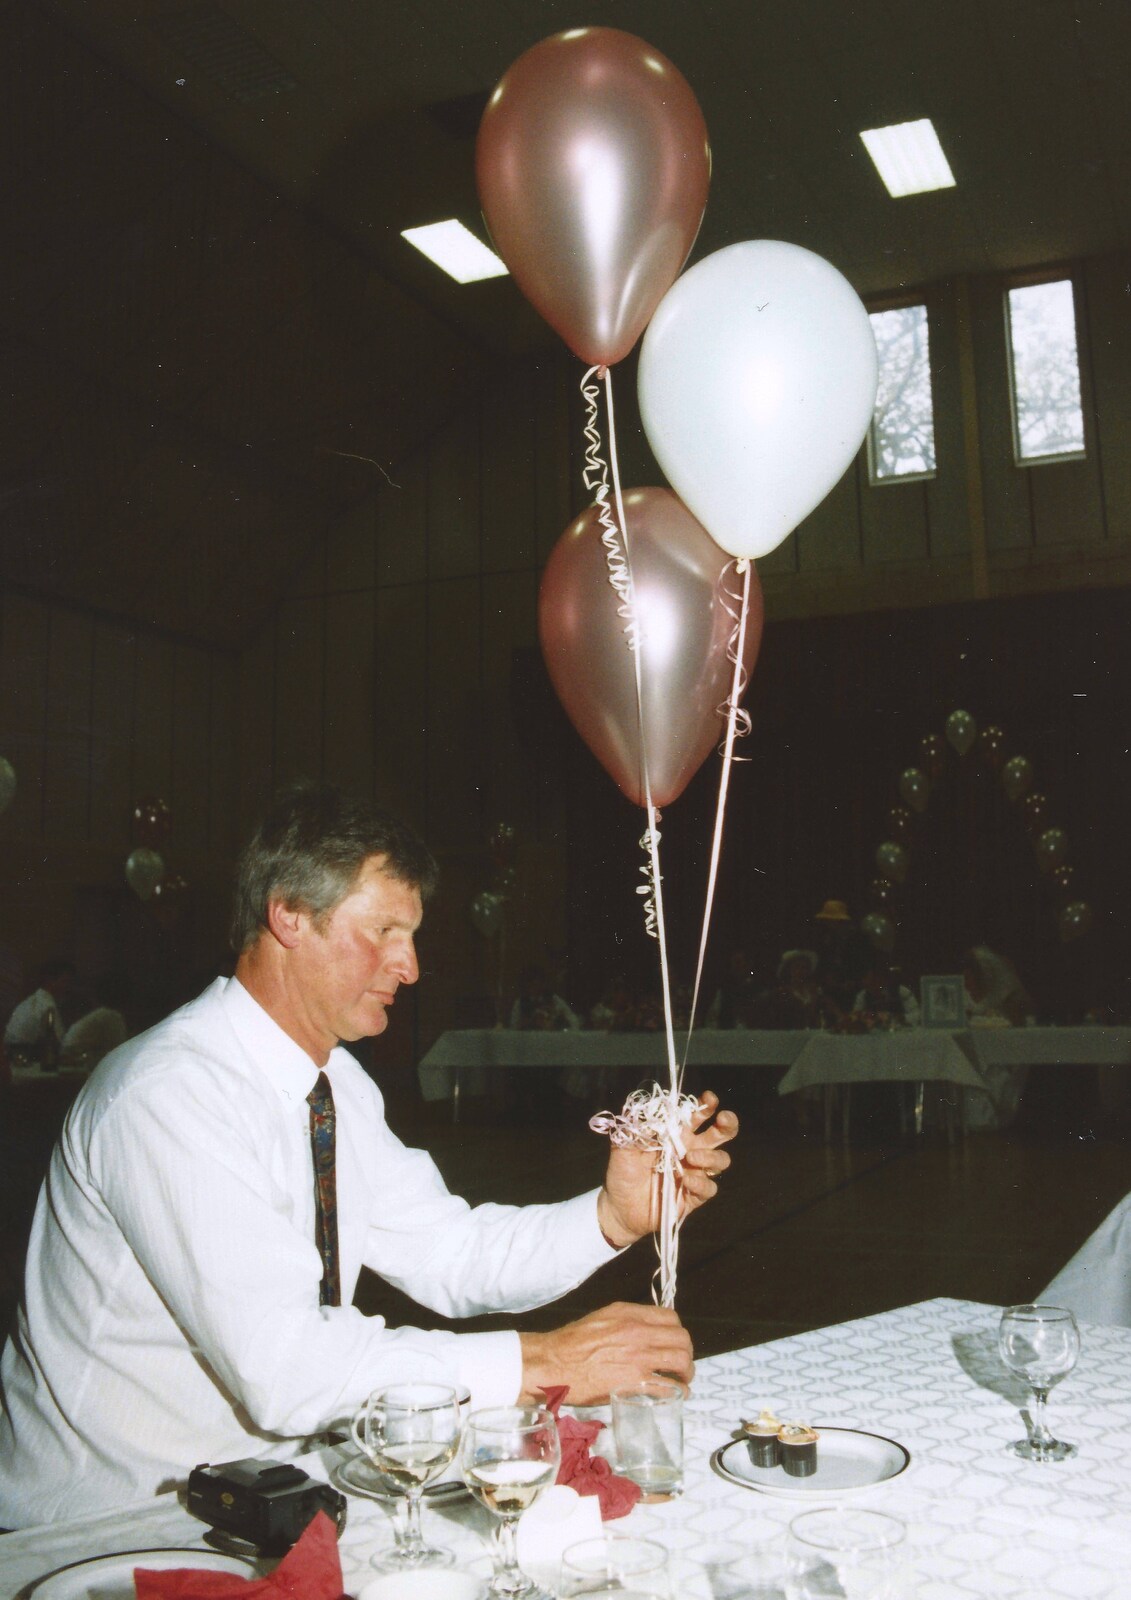 Geoff messes around with balloons from Debbie's Wedding, Suffolk - 12th June 1999